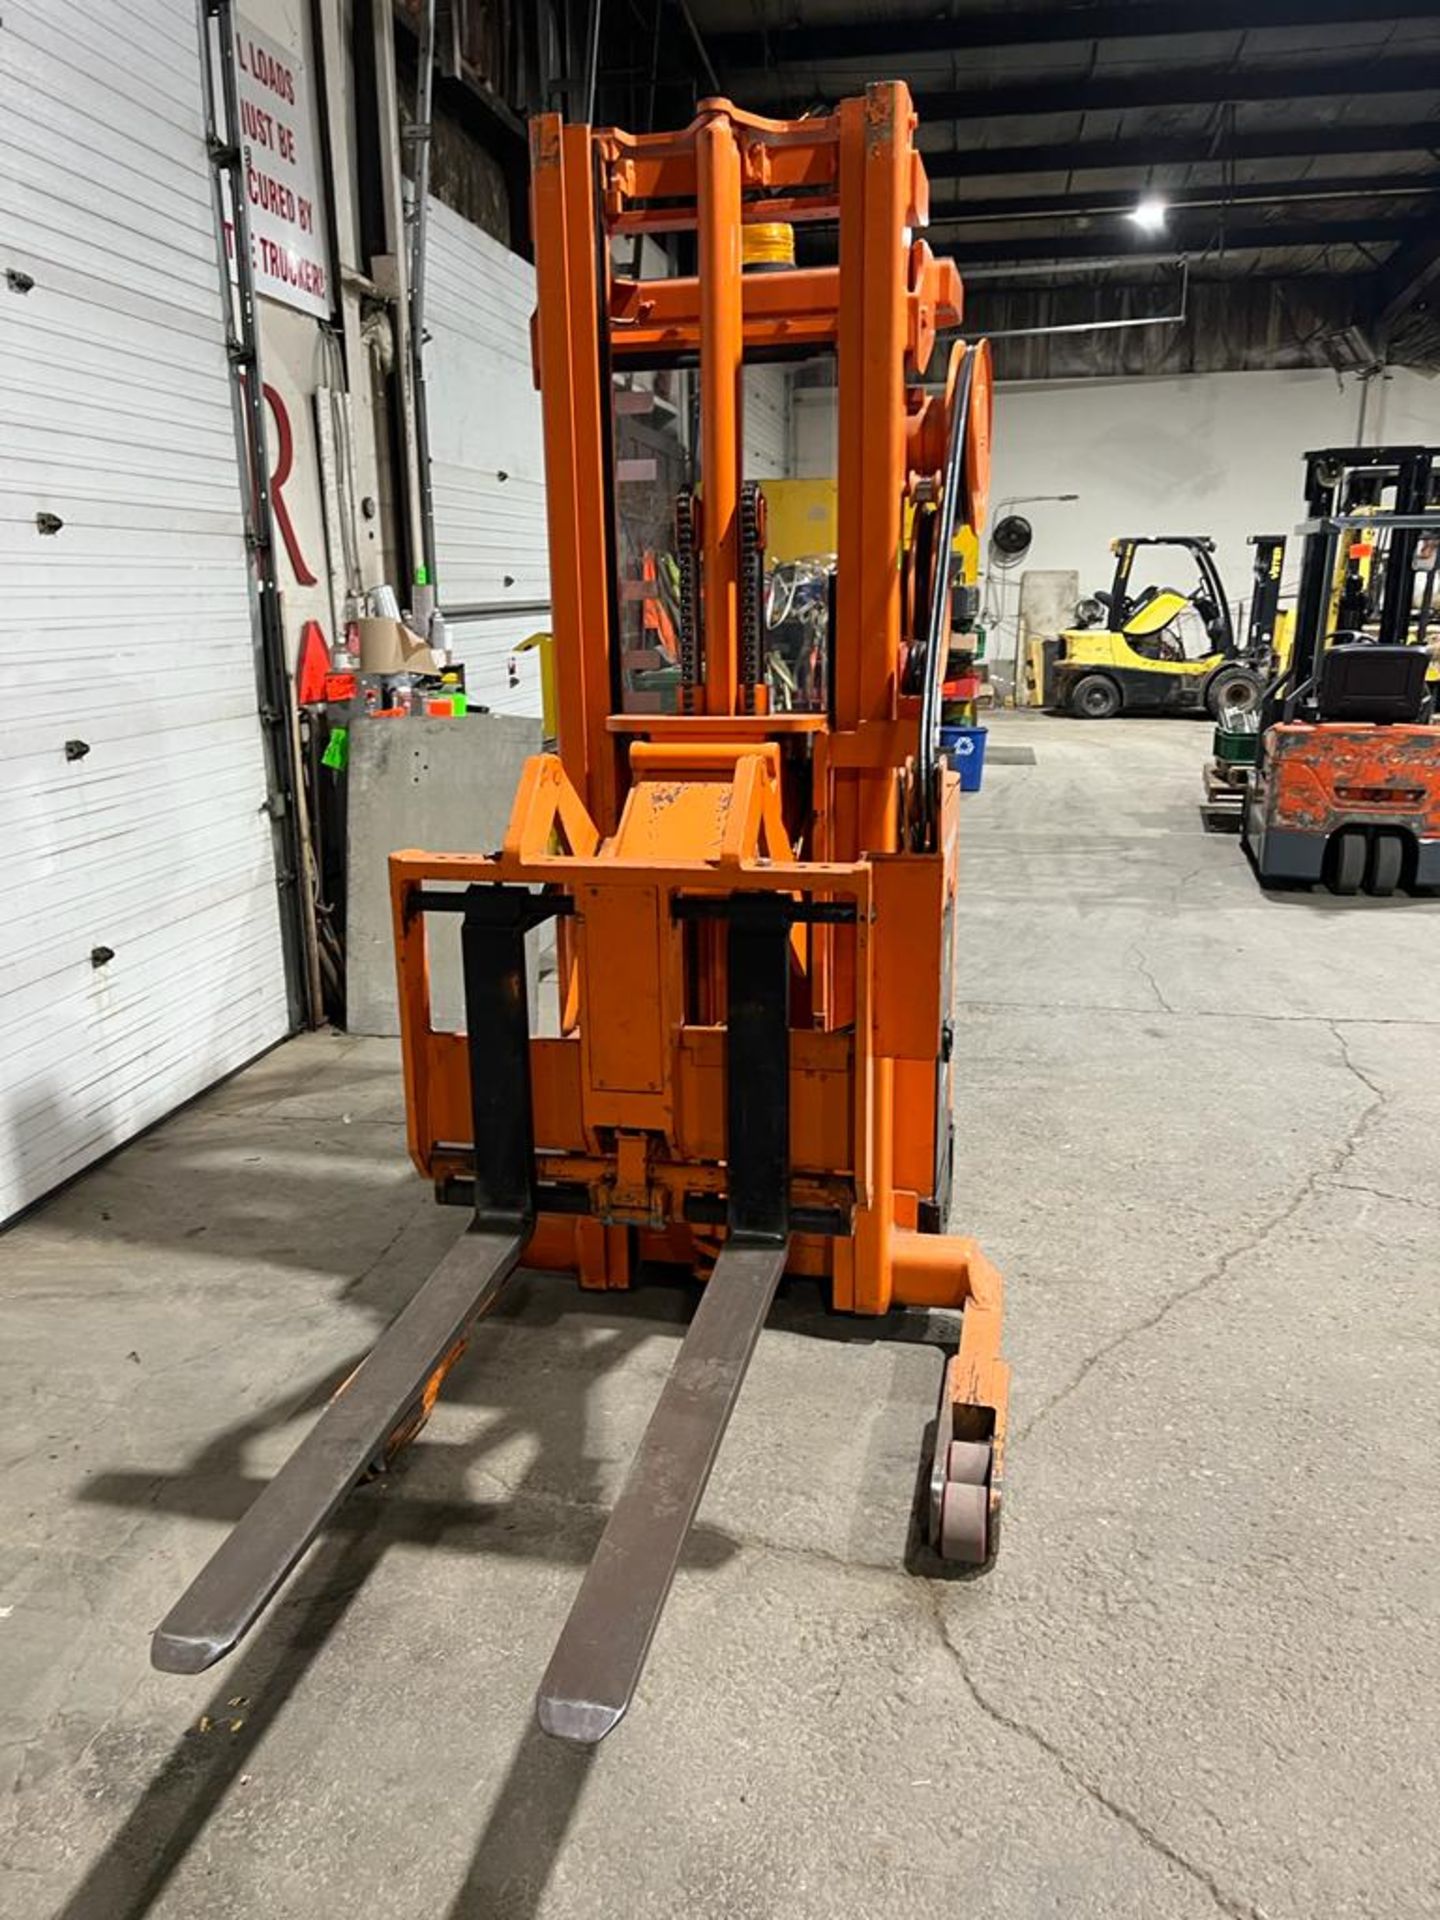 NICE Raymond Reach Truck 3,000lbs capacity with 48" Forks, 24V electric with sideshift & 3-stage - Image 2 of 3